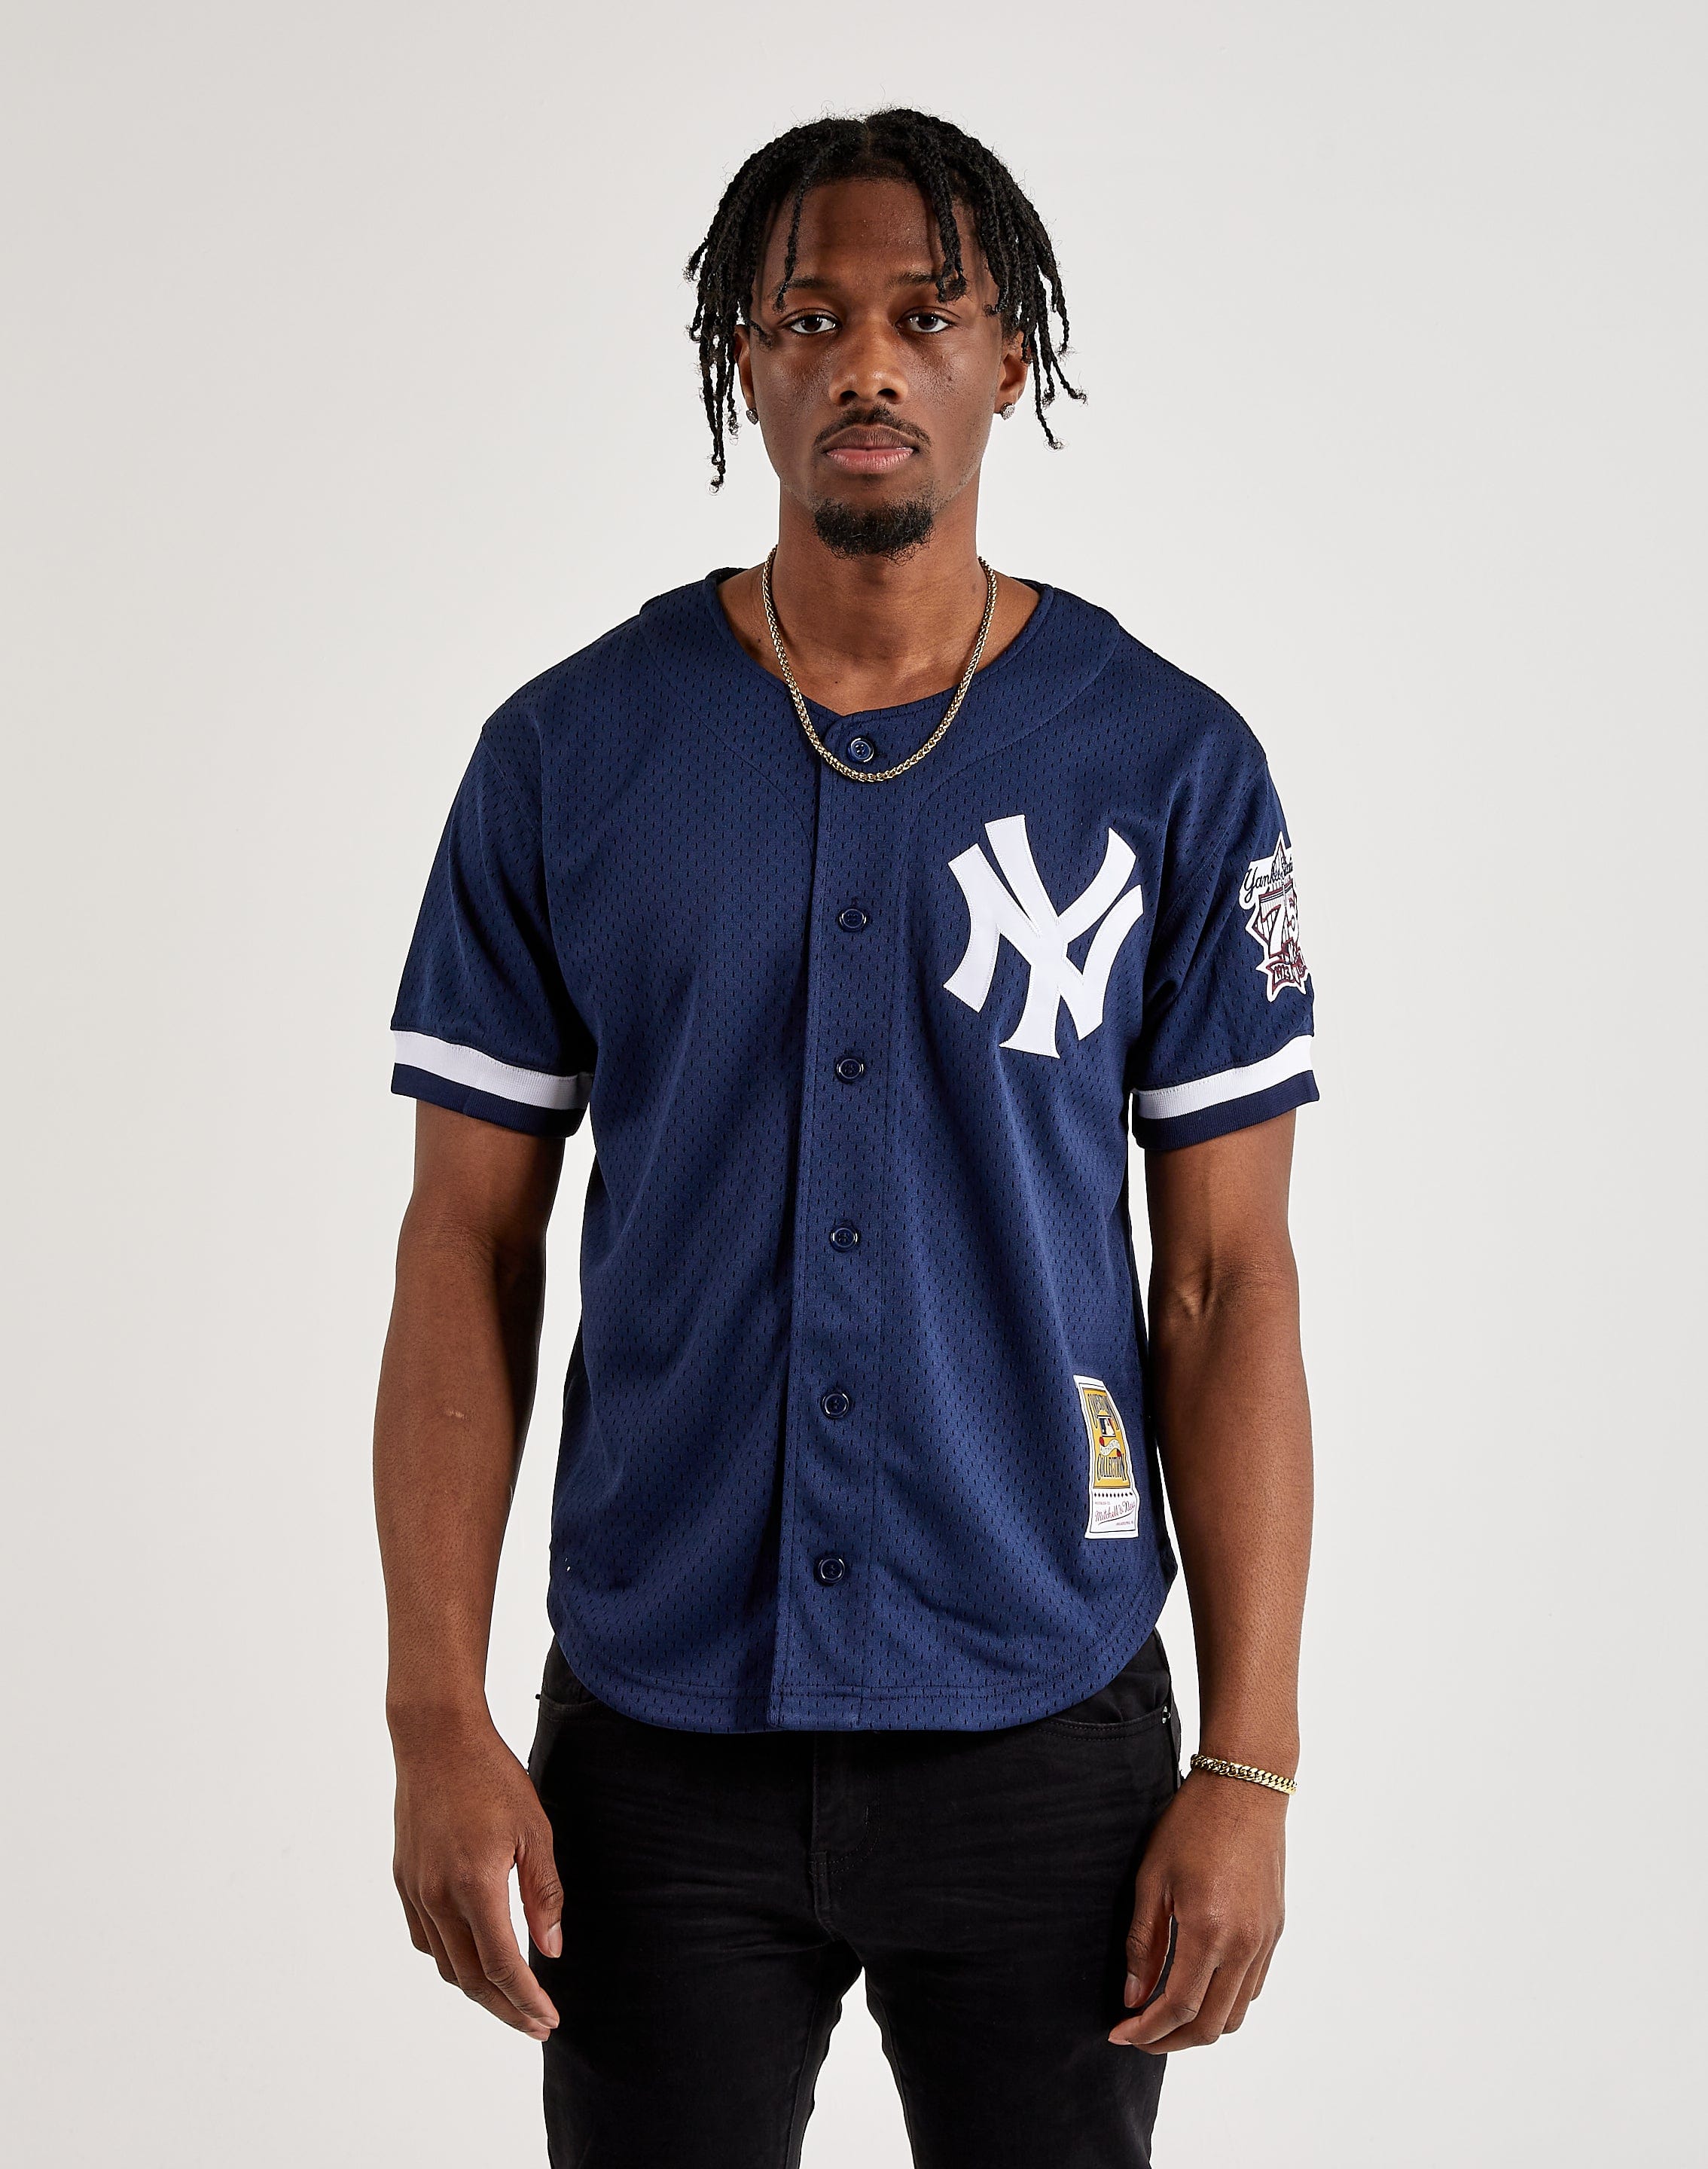 new york yankees jerseys for sale